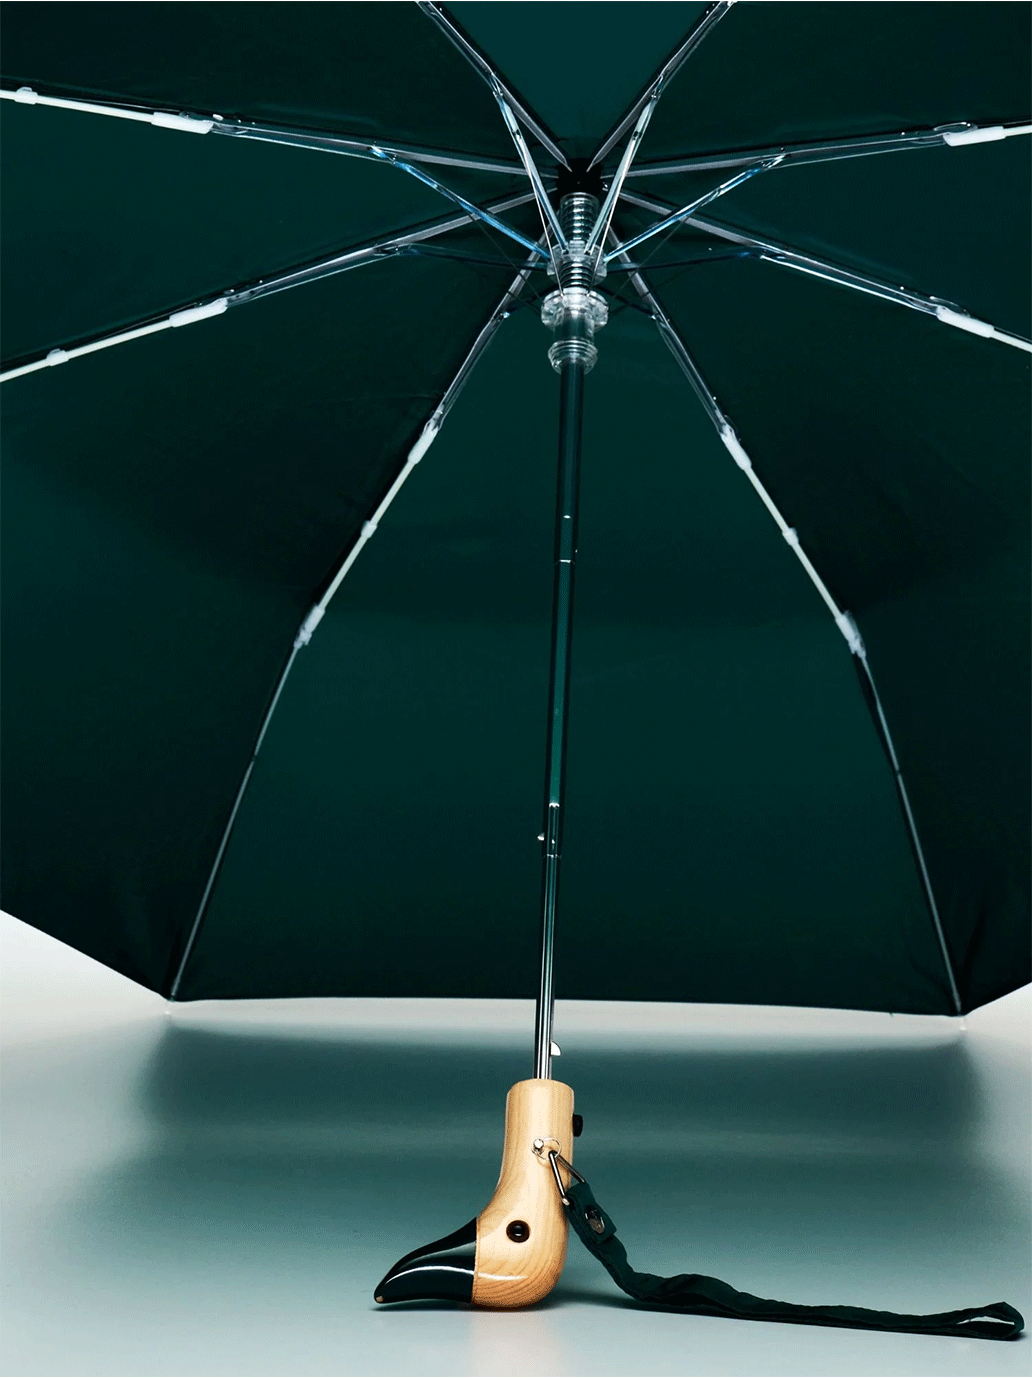 Umbrella made of recycled fabric